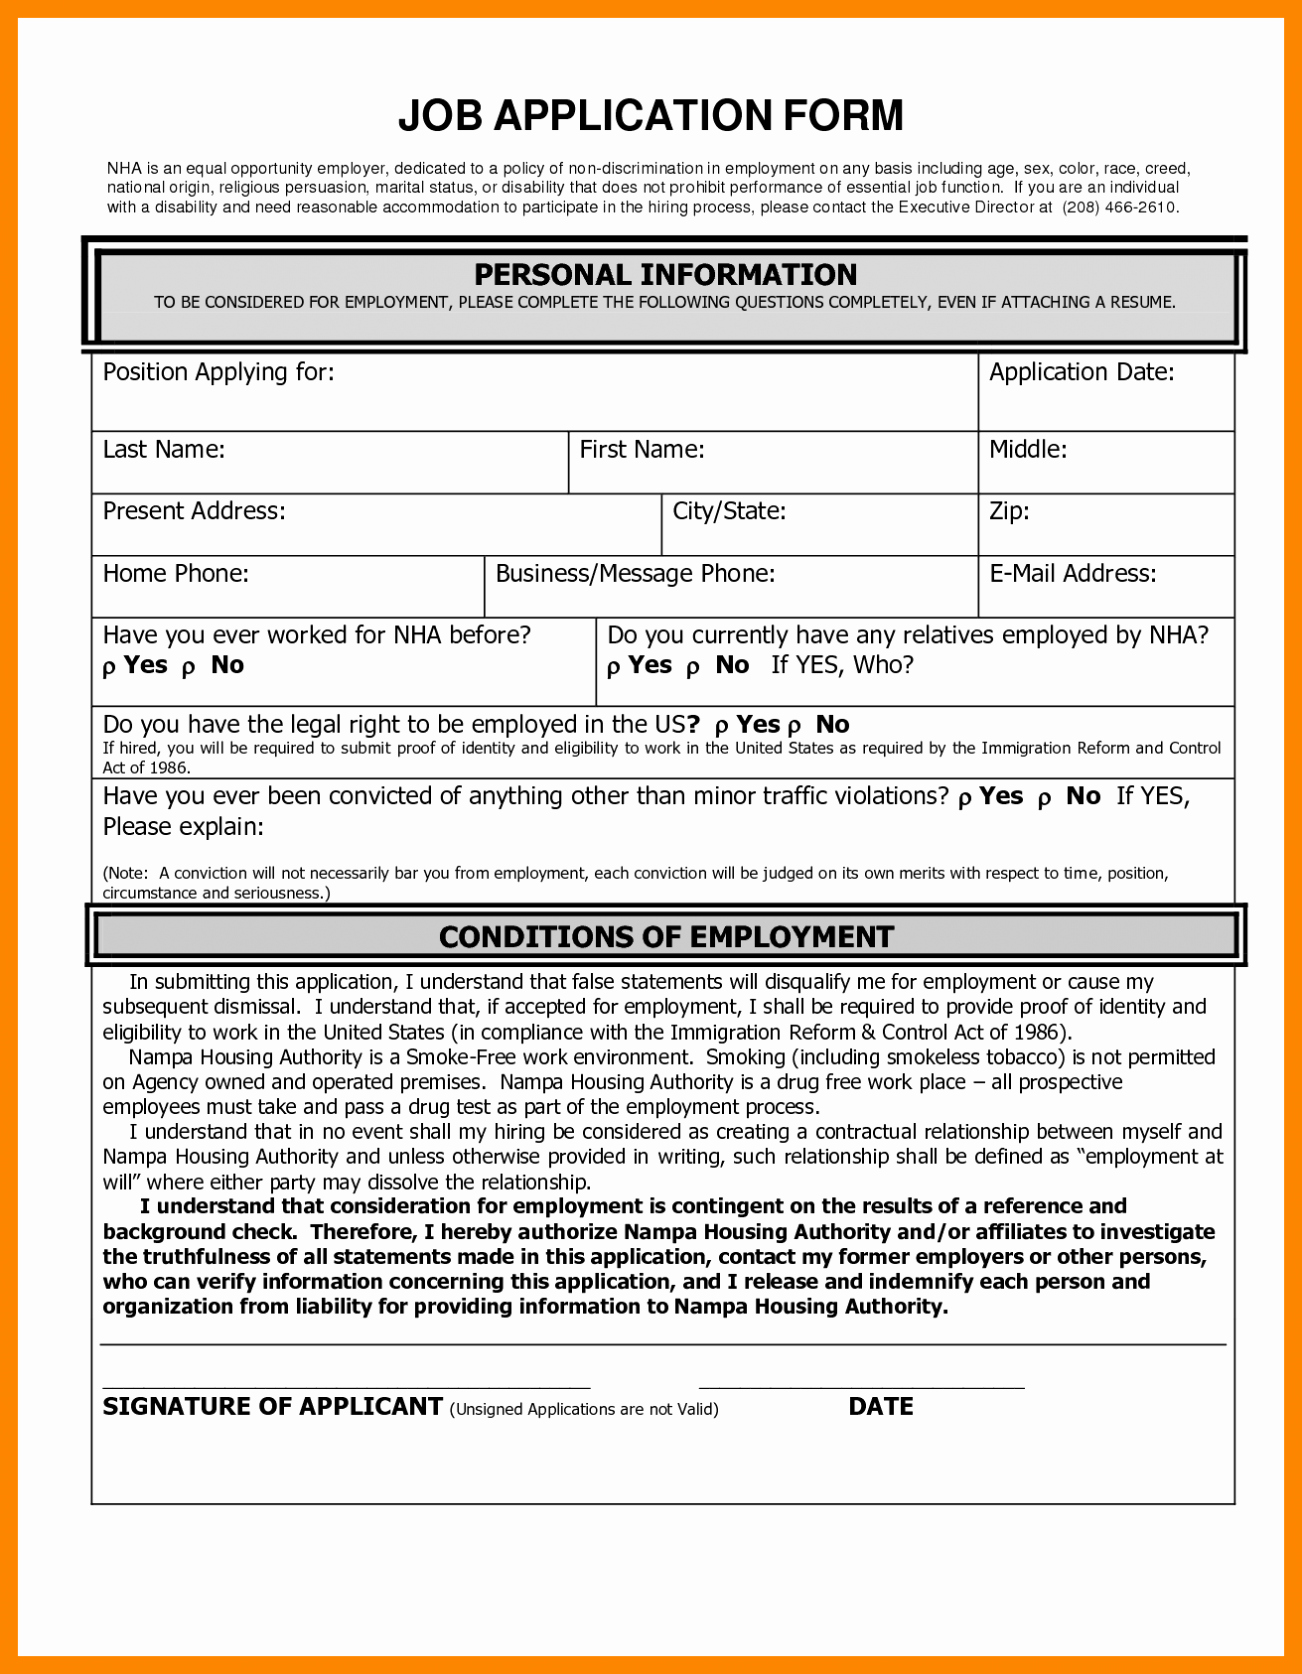 Application for Employment Free Template Best Of Free Employment Application Template Pdf